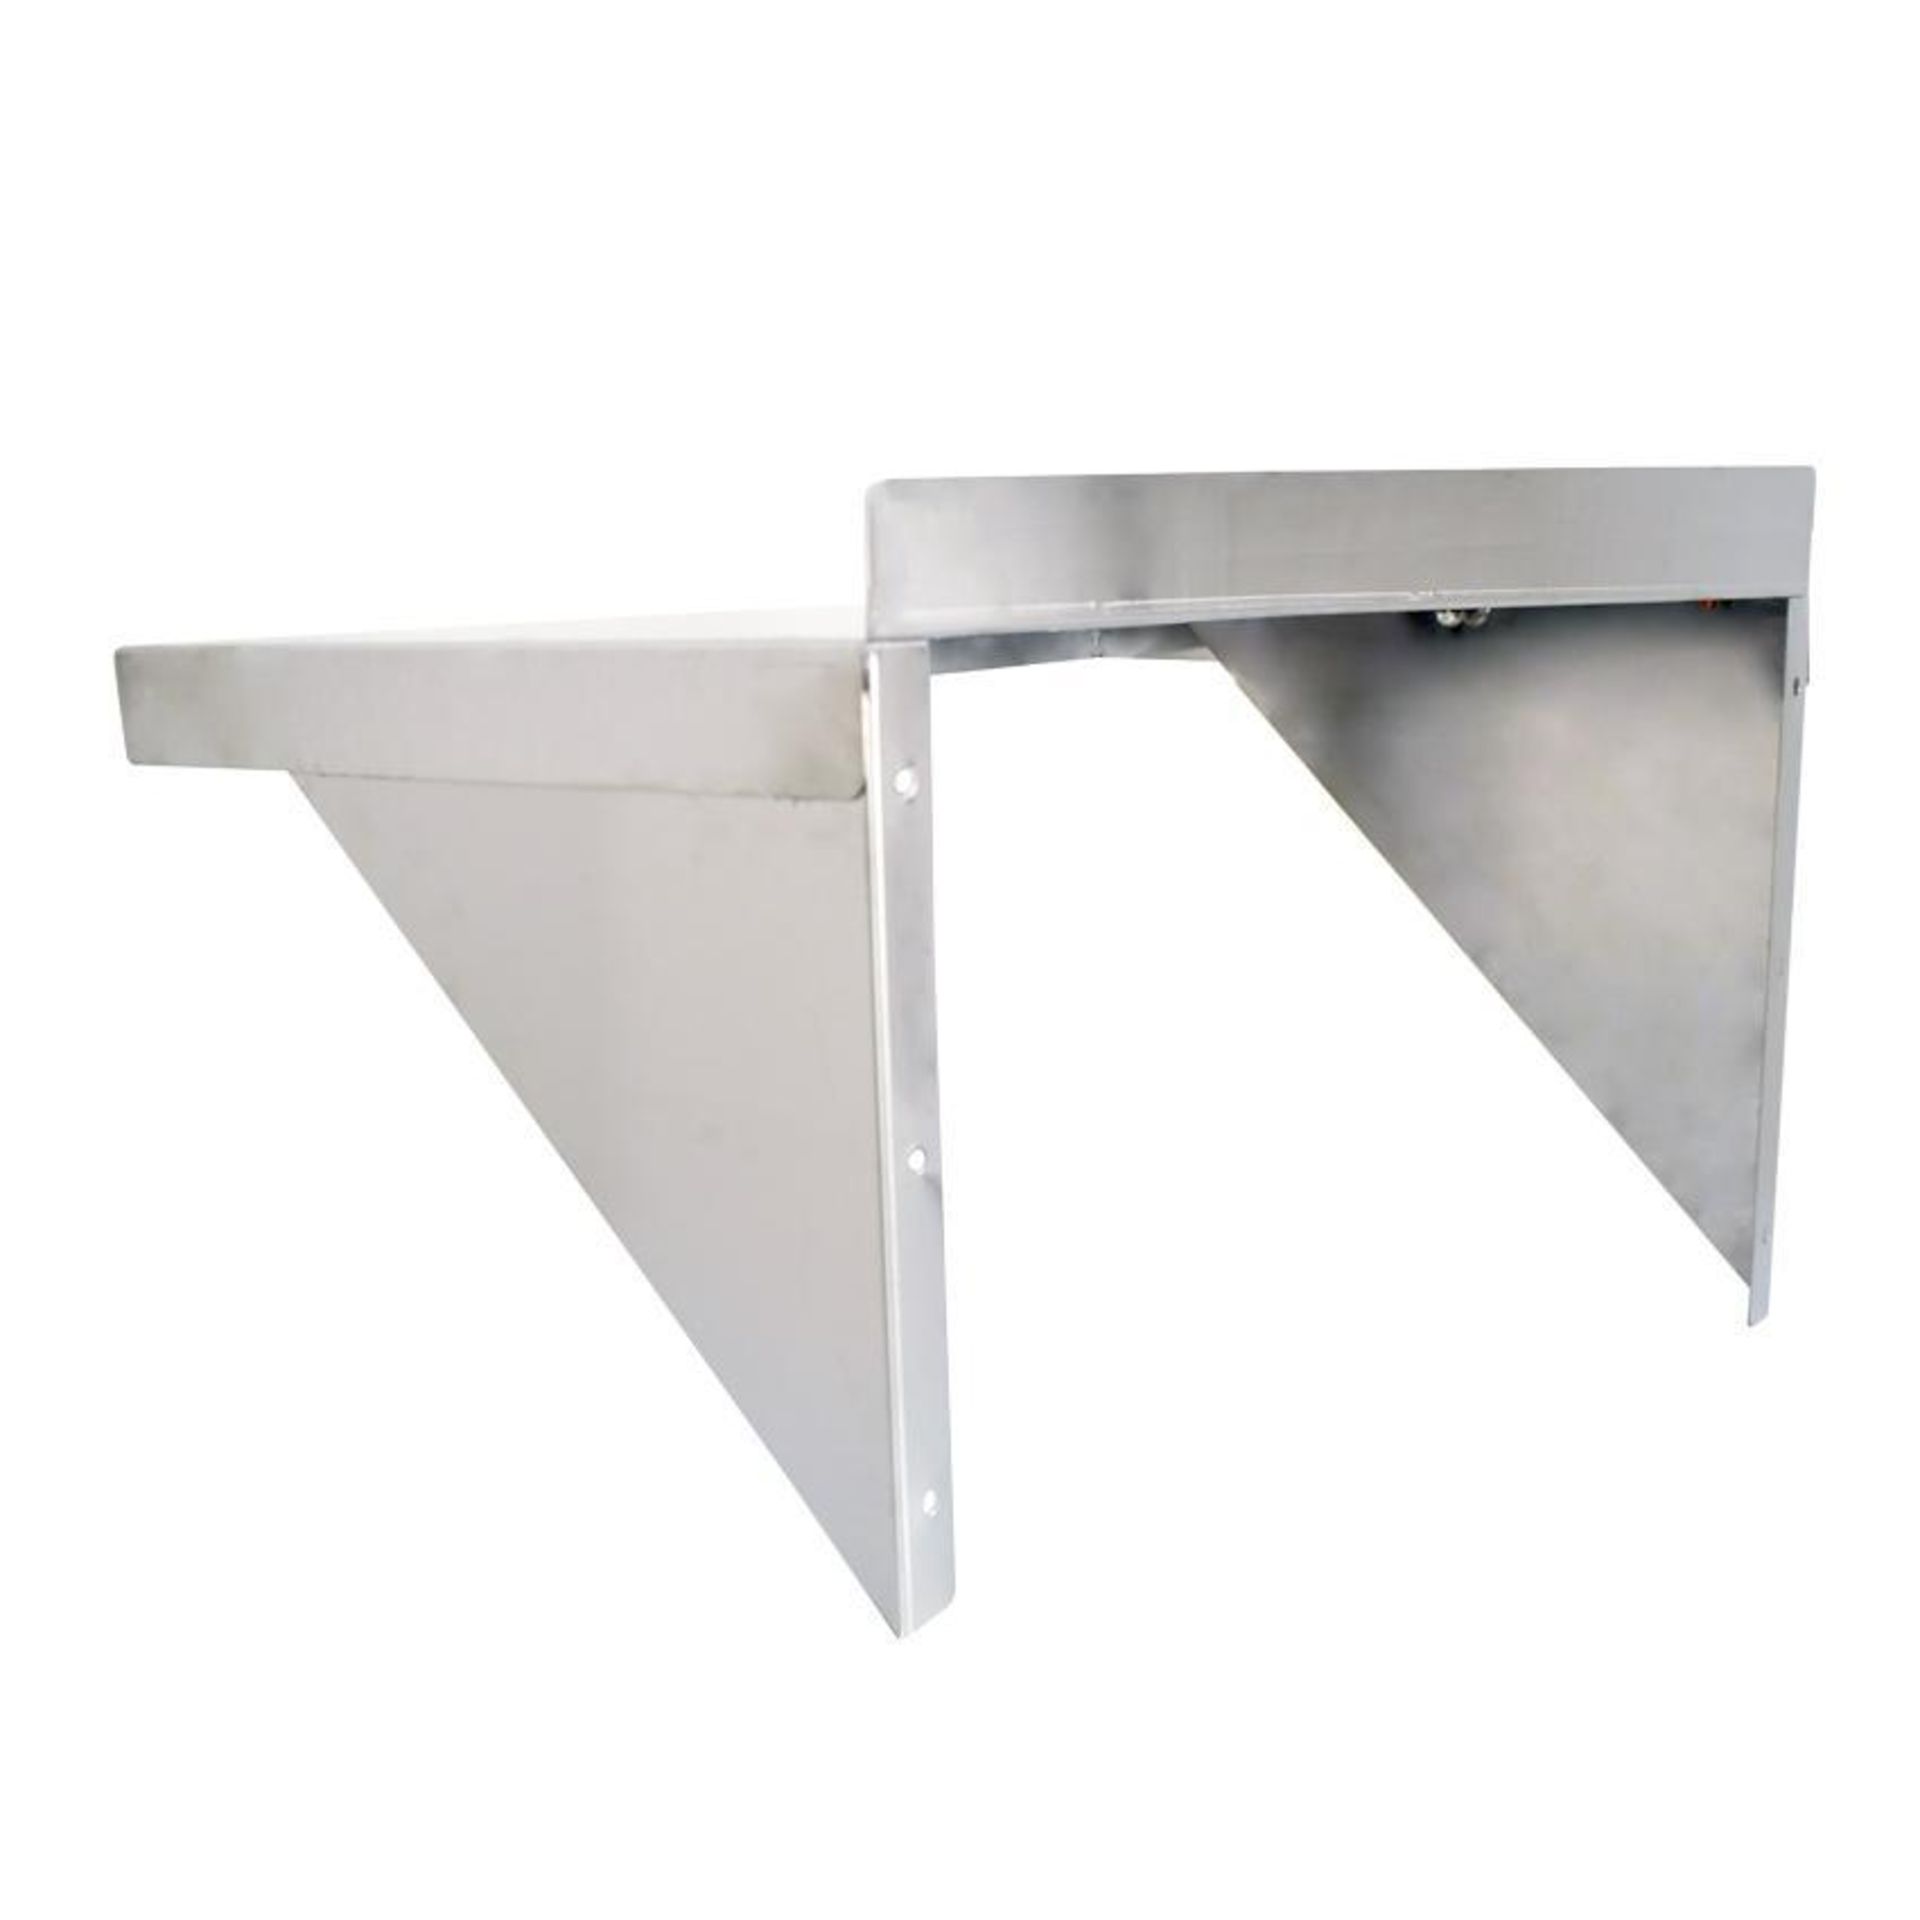 36" X 16" STAINLESS STEEL WALL SHELF - OMCAN 24409 - NEW - Image 13 of 13